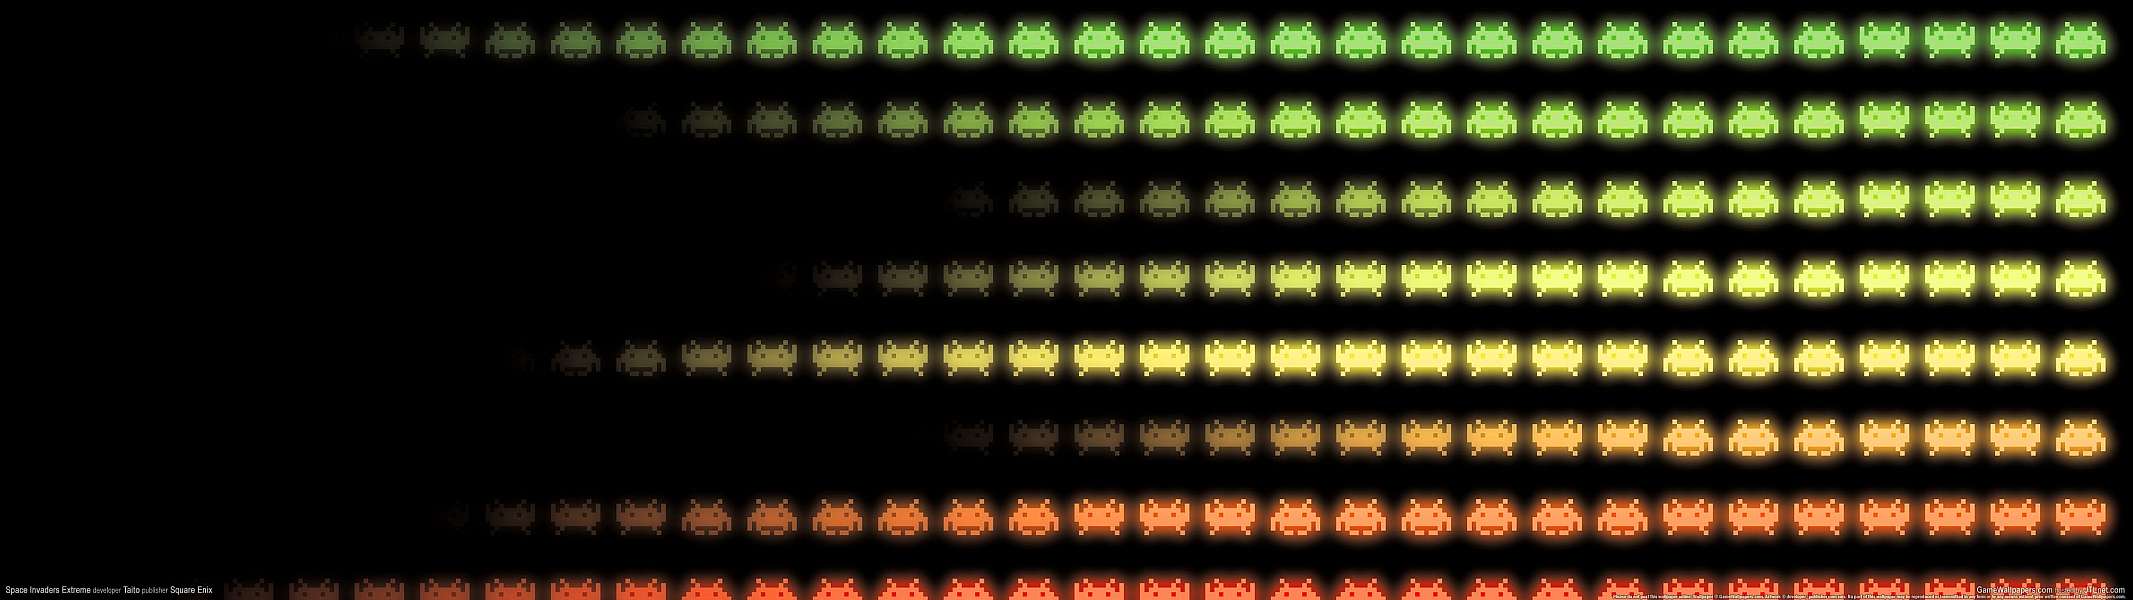 Space Invaders Extreme dual screen wallpaper or background